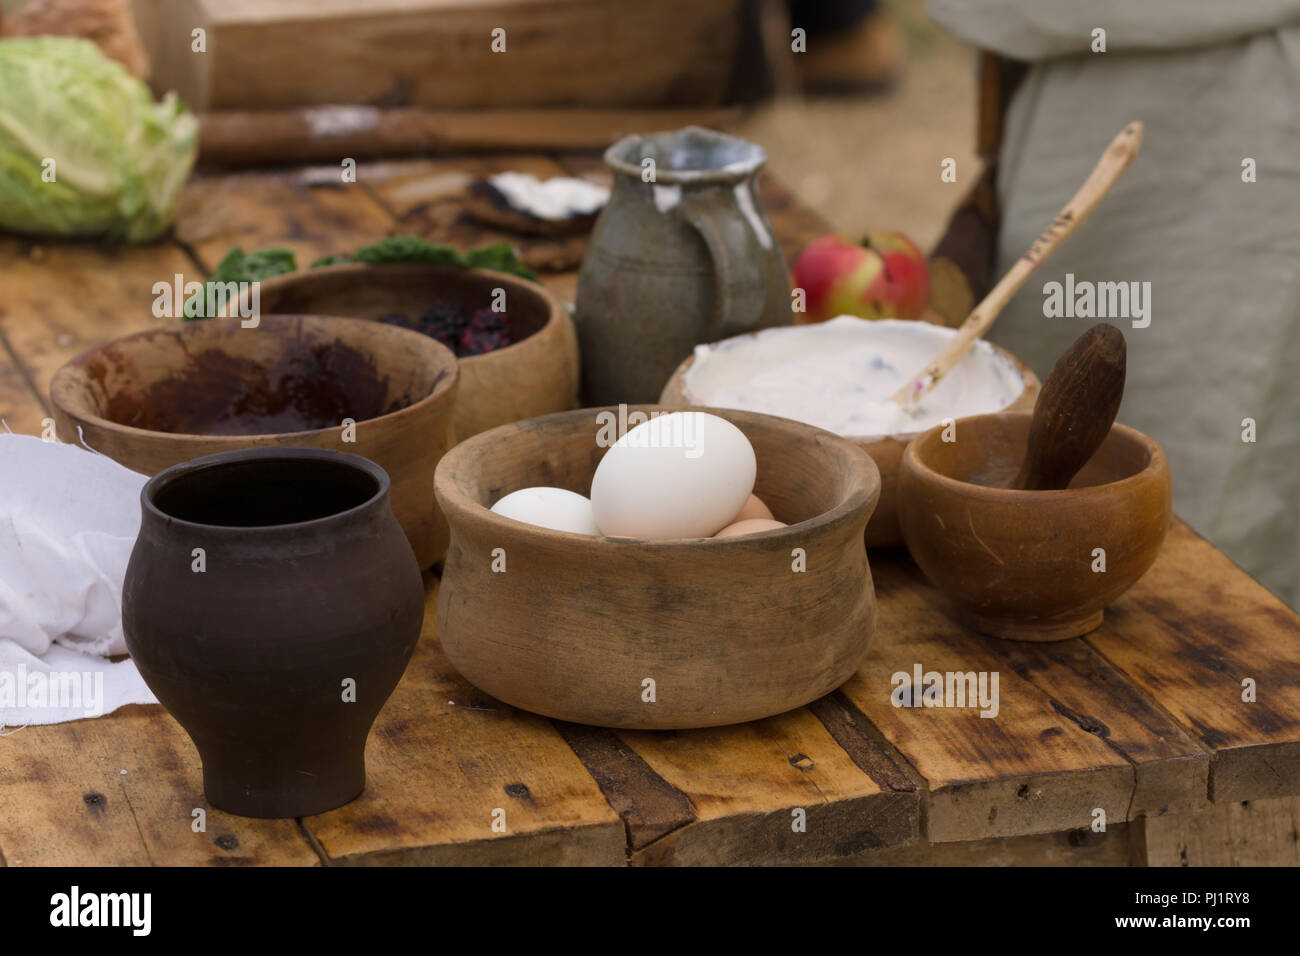 Medieval food preparation including eggs, cream and fruit in wooden bowls or trenchers Stock Photo